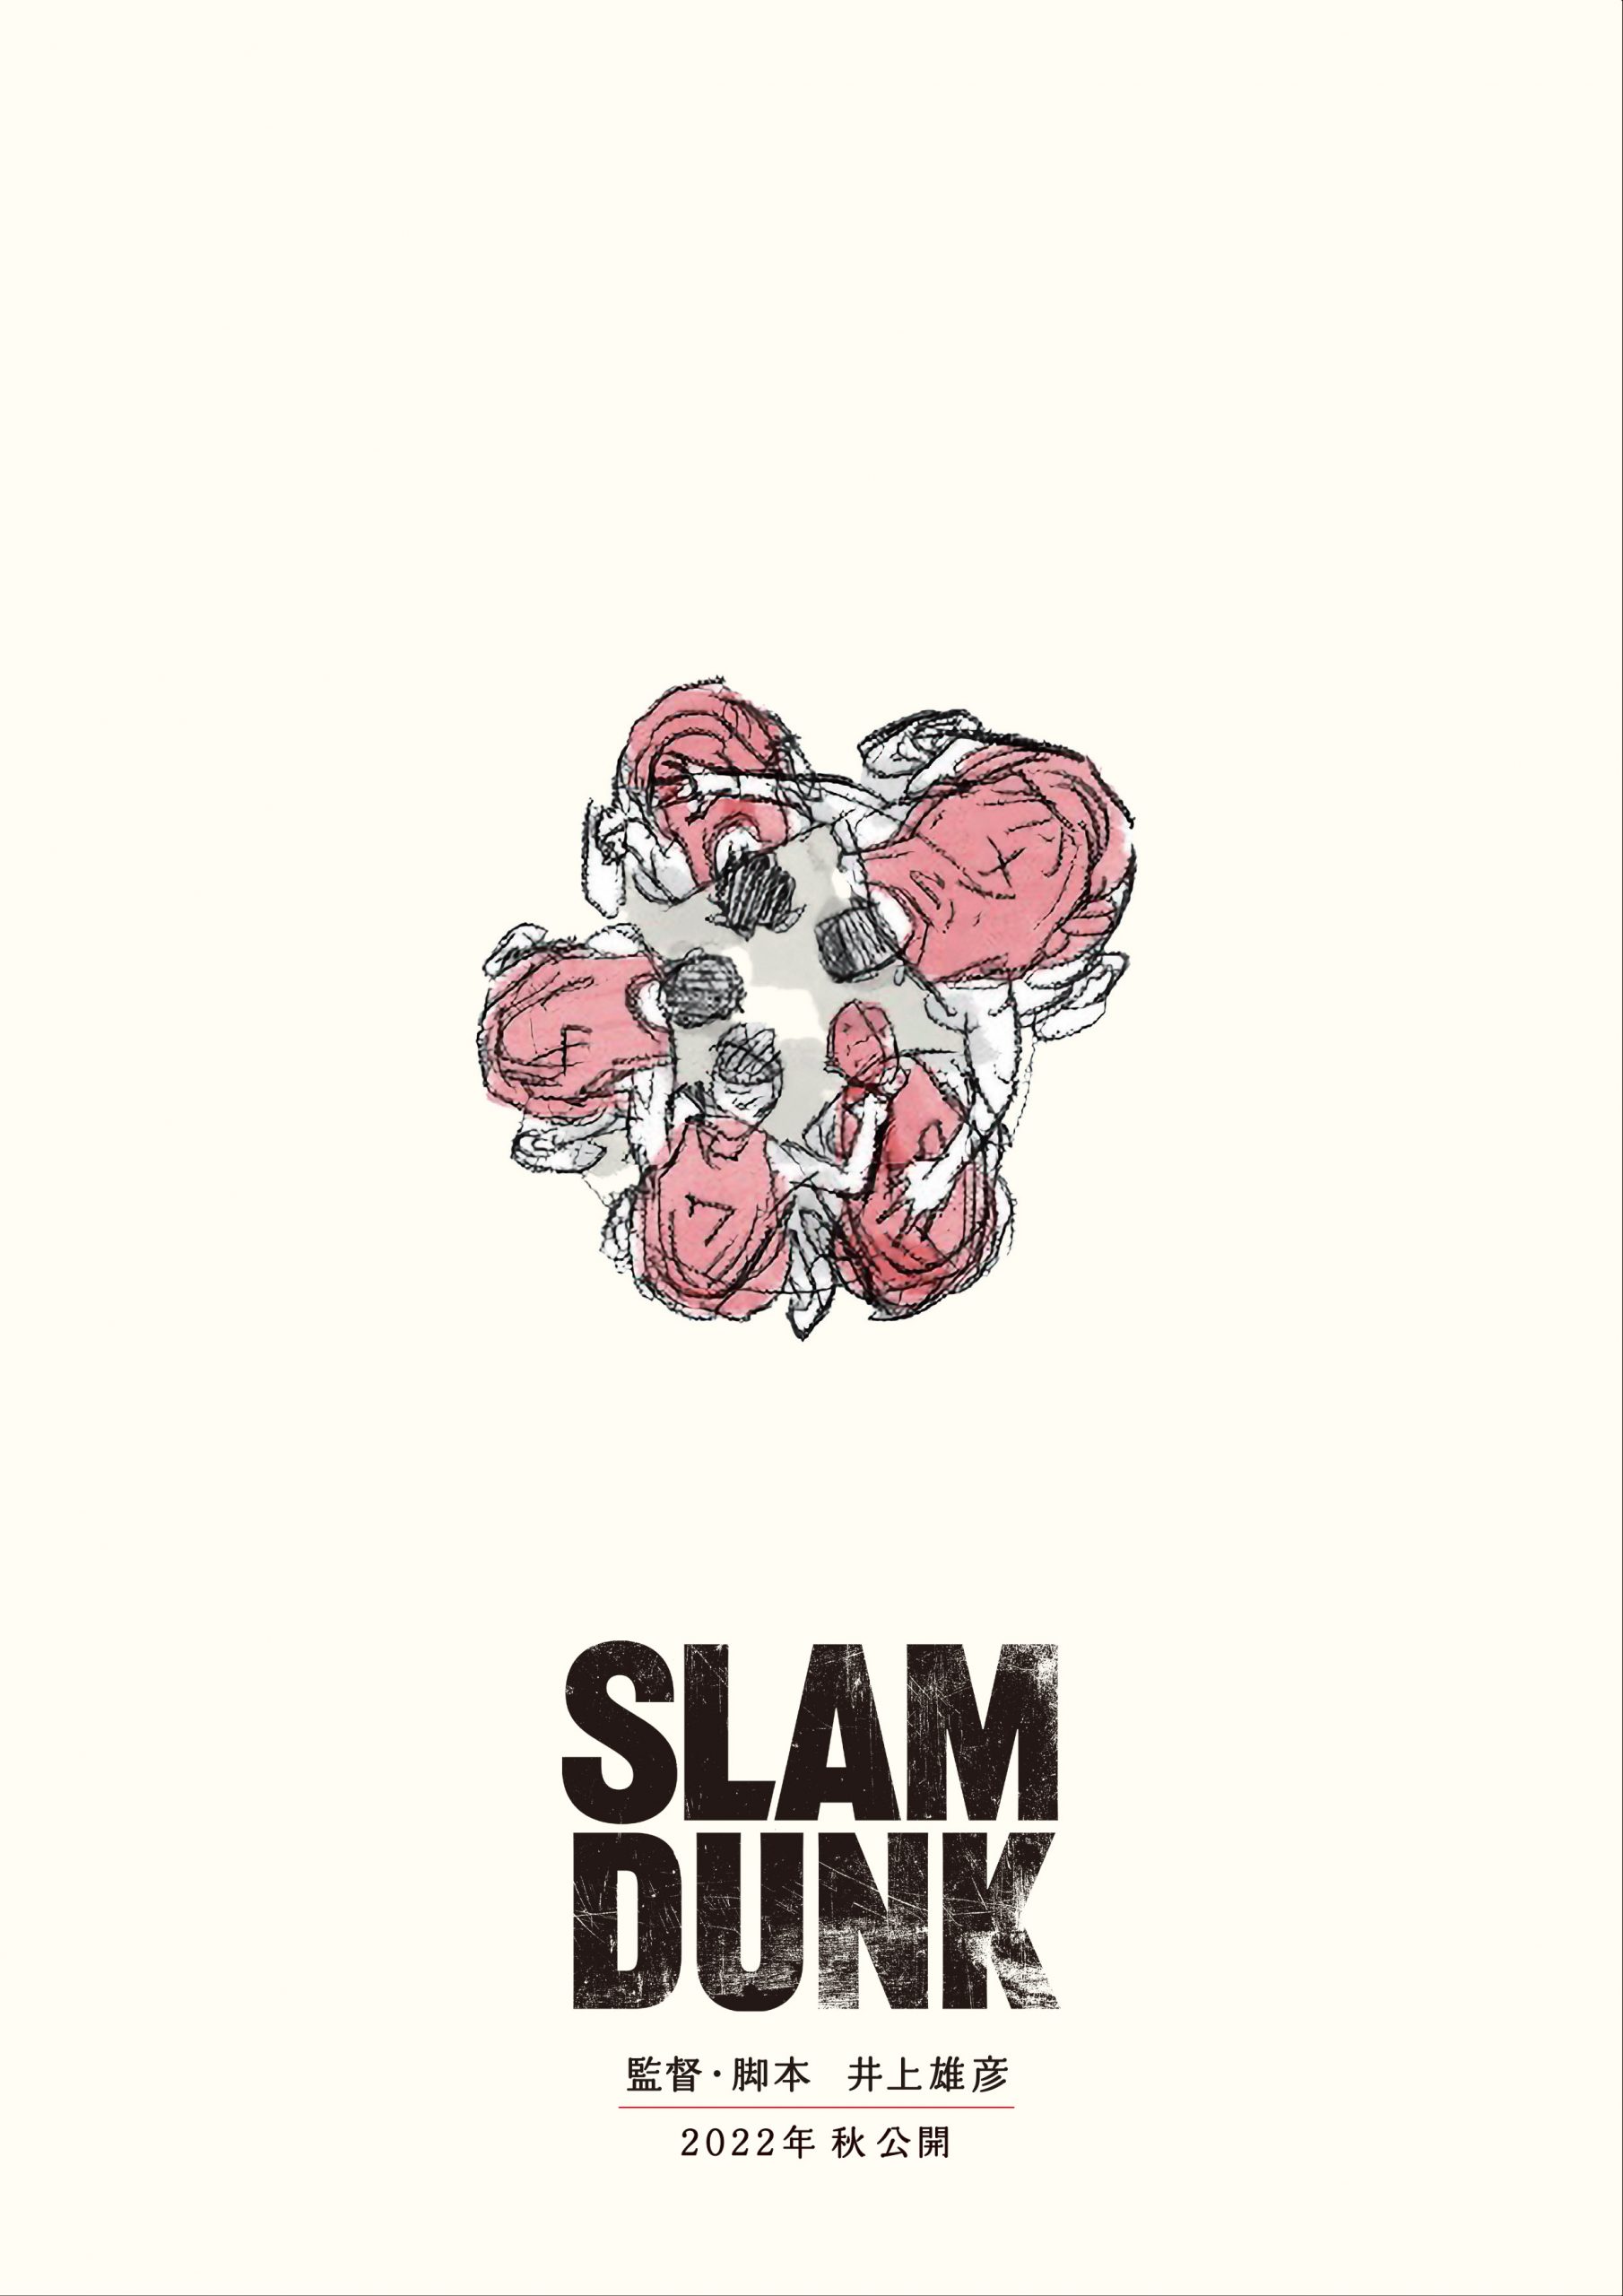 slam-dunk-movie-kv-scaled "Slam Dunk" Movie Releases New Visual, Coming in Fall 2022!